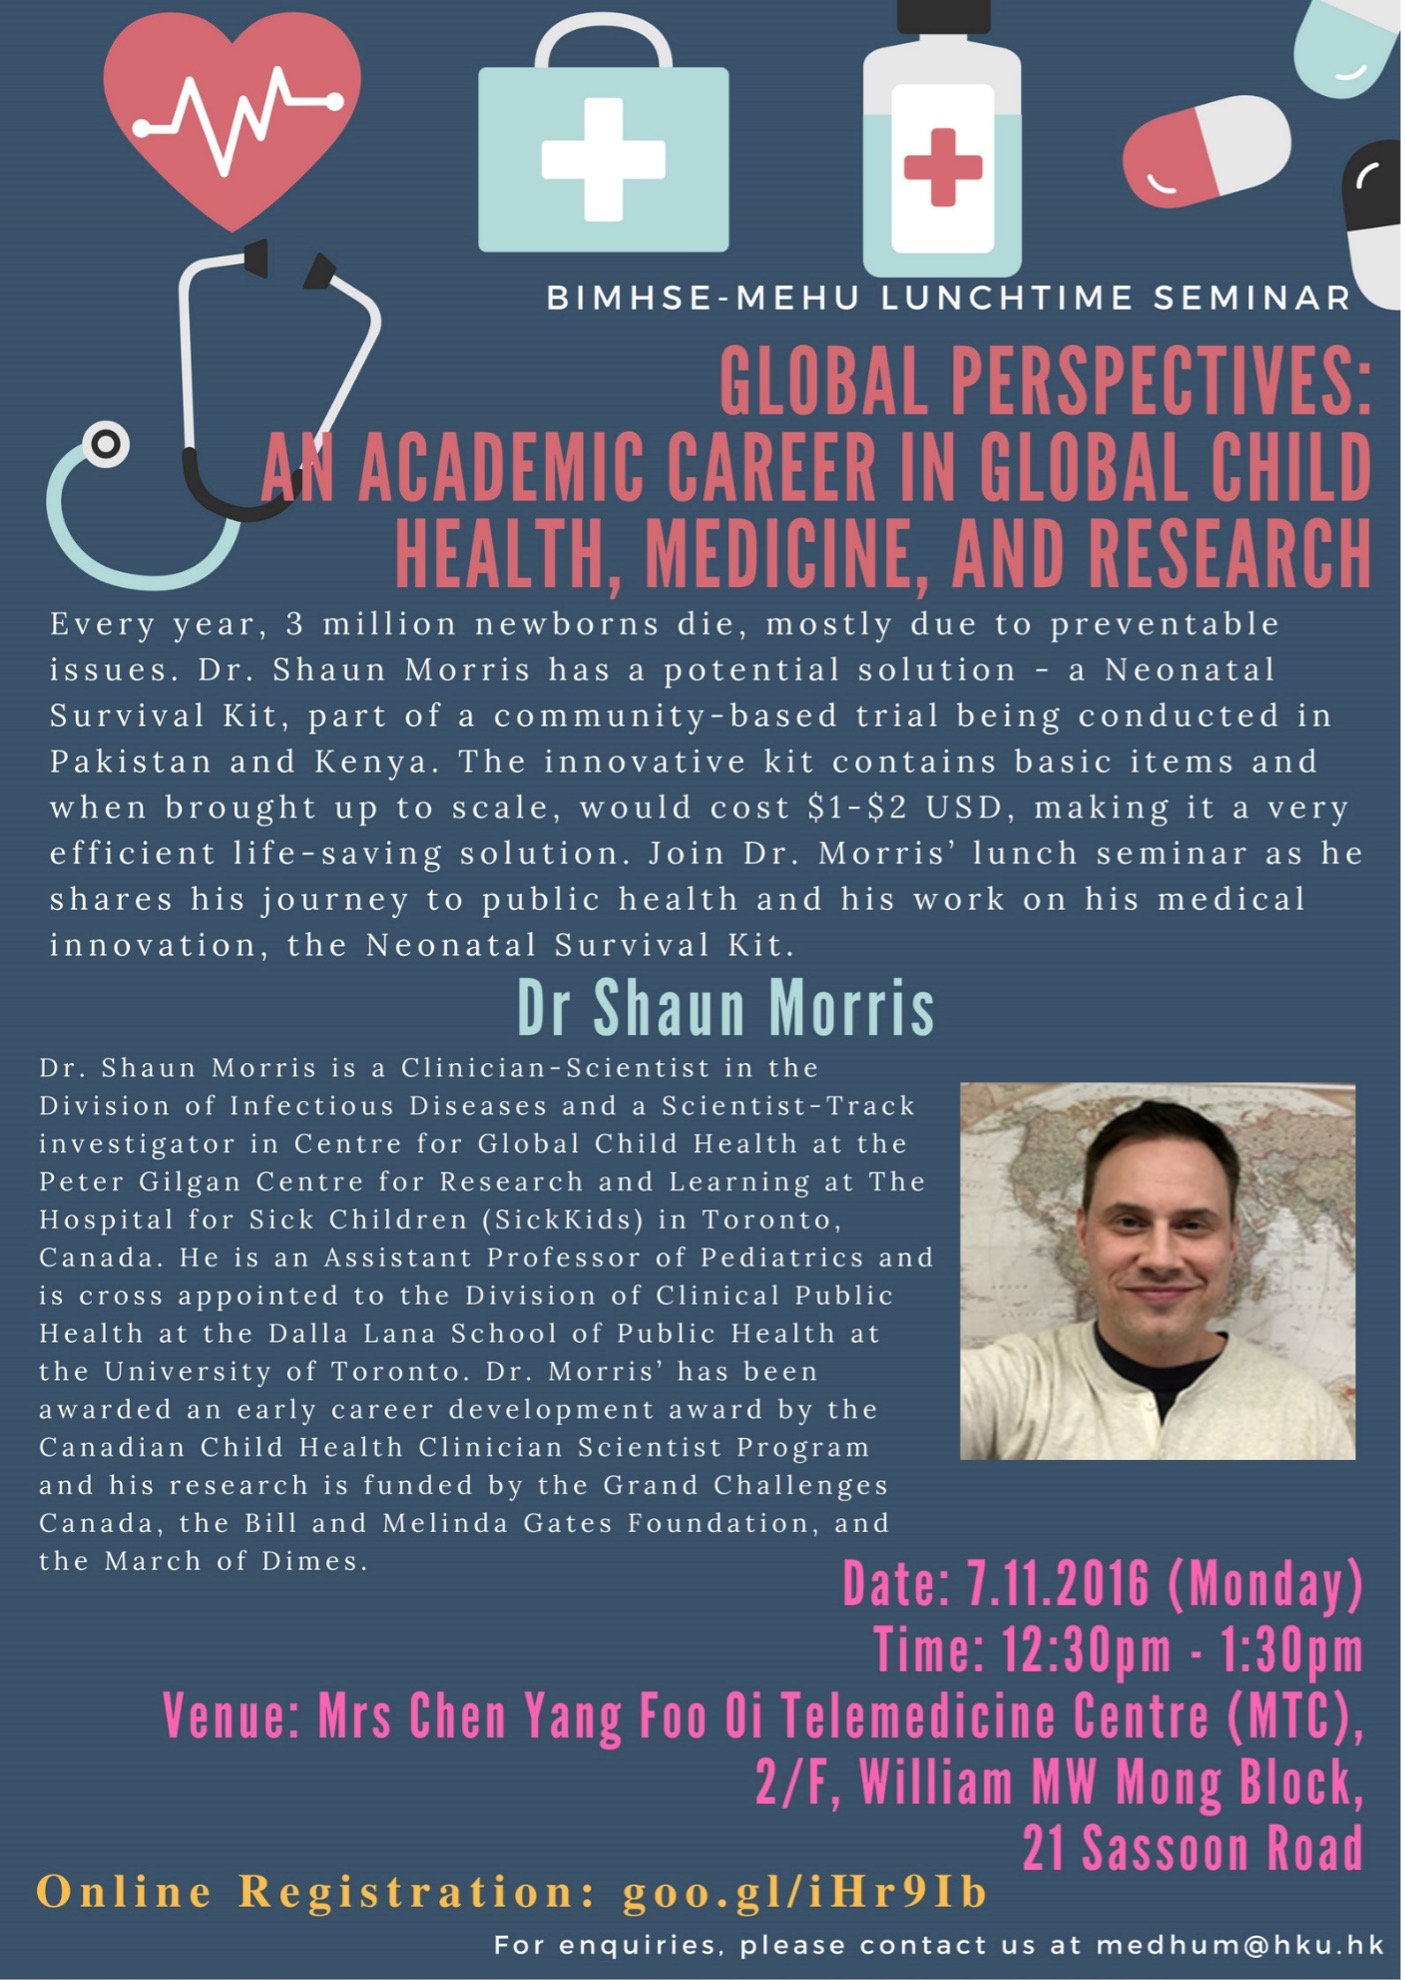 Global Perspectives: An Academic Career In Global Child Health, Medicine, And Research